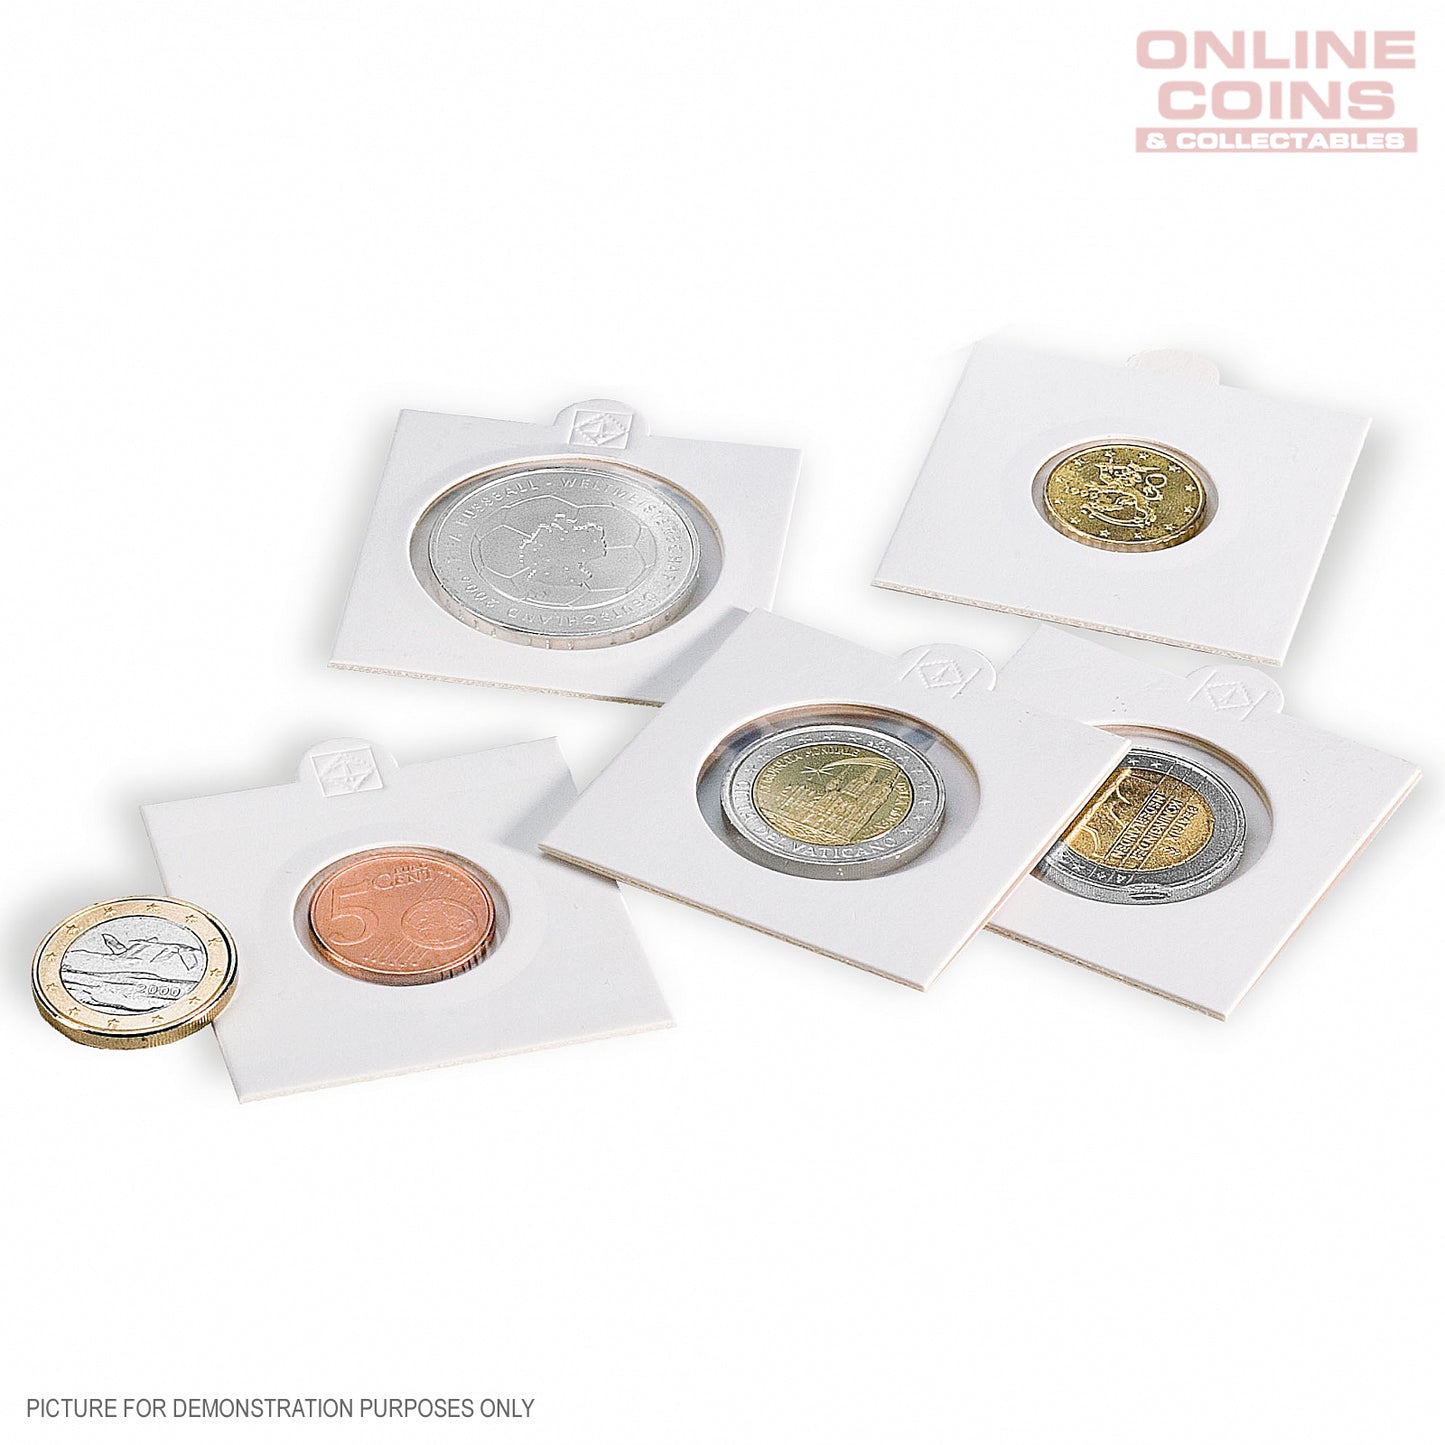 Lighthouse MATRIX WHITE 20mm Self Adhesive 2"x2" Coin Holders x 25 -  Protection for your Coins (Suitable For Australian 1c, 5c, Sixpence And Half Sovereigns)